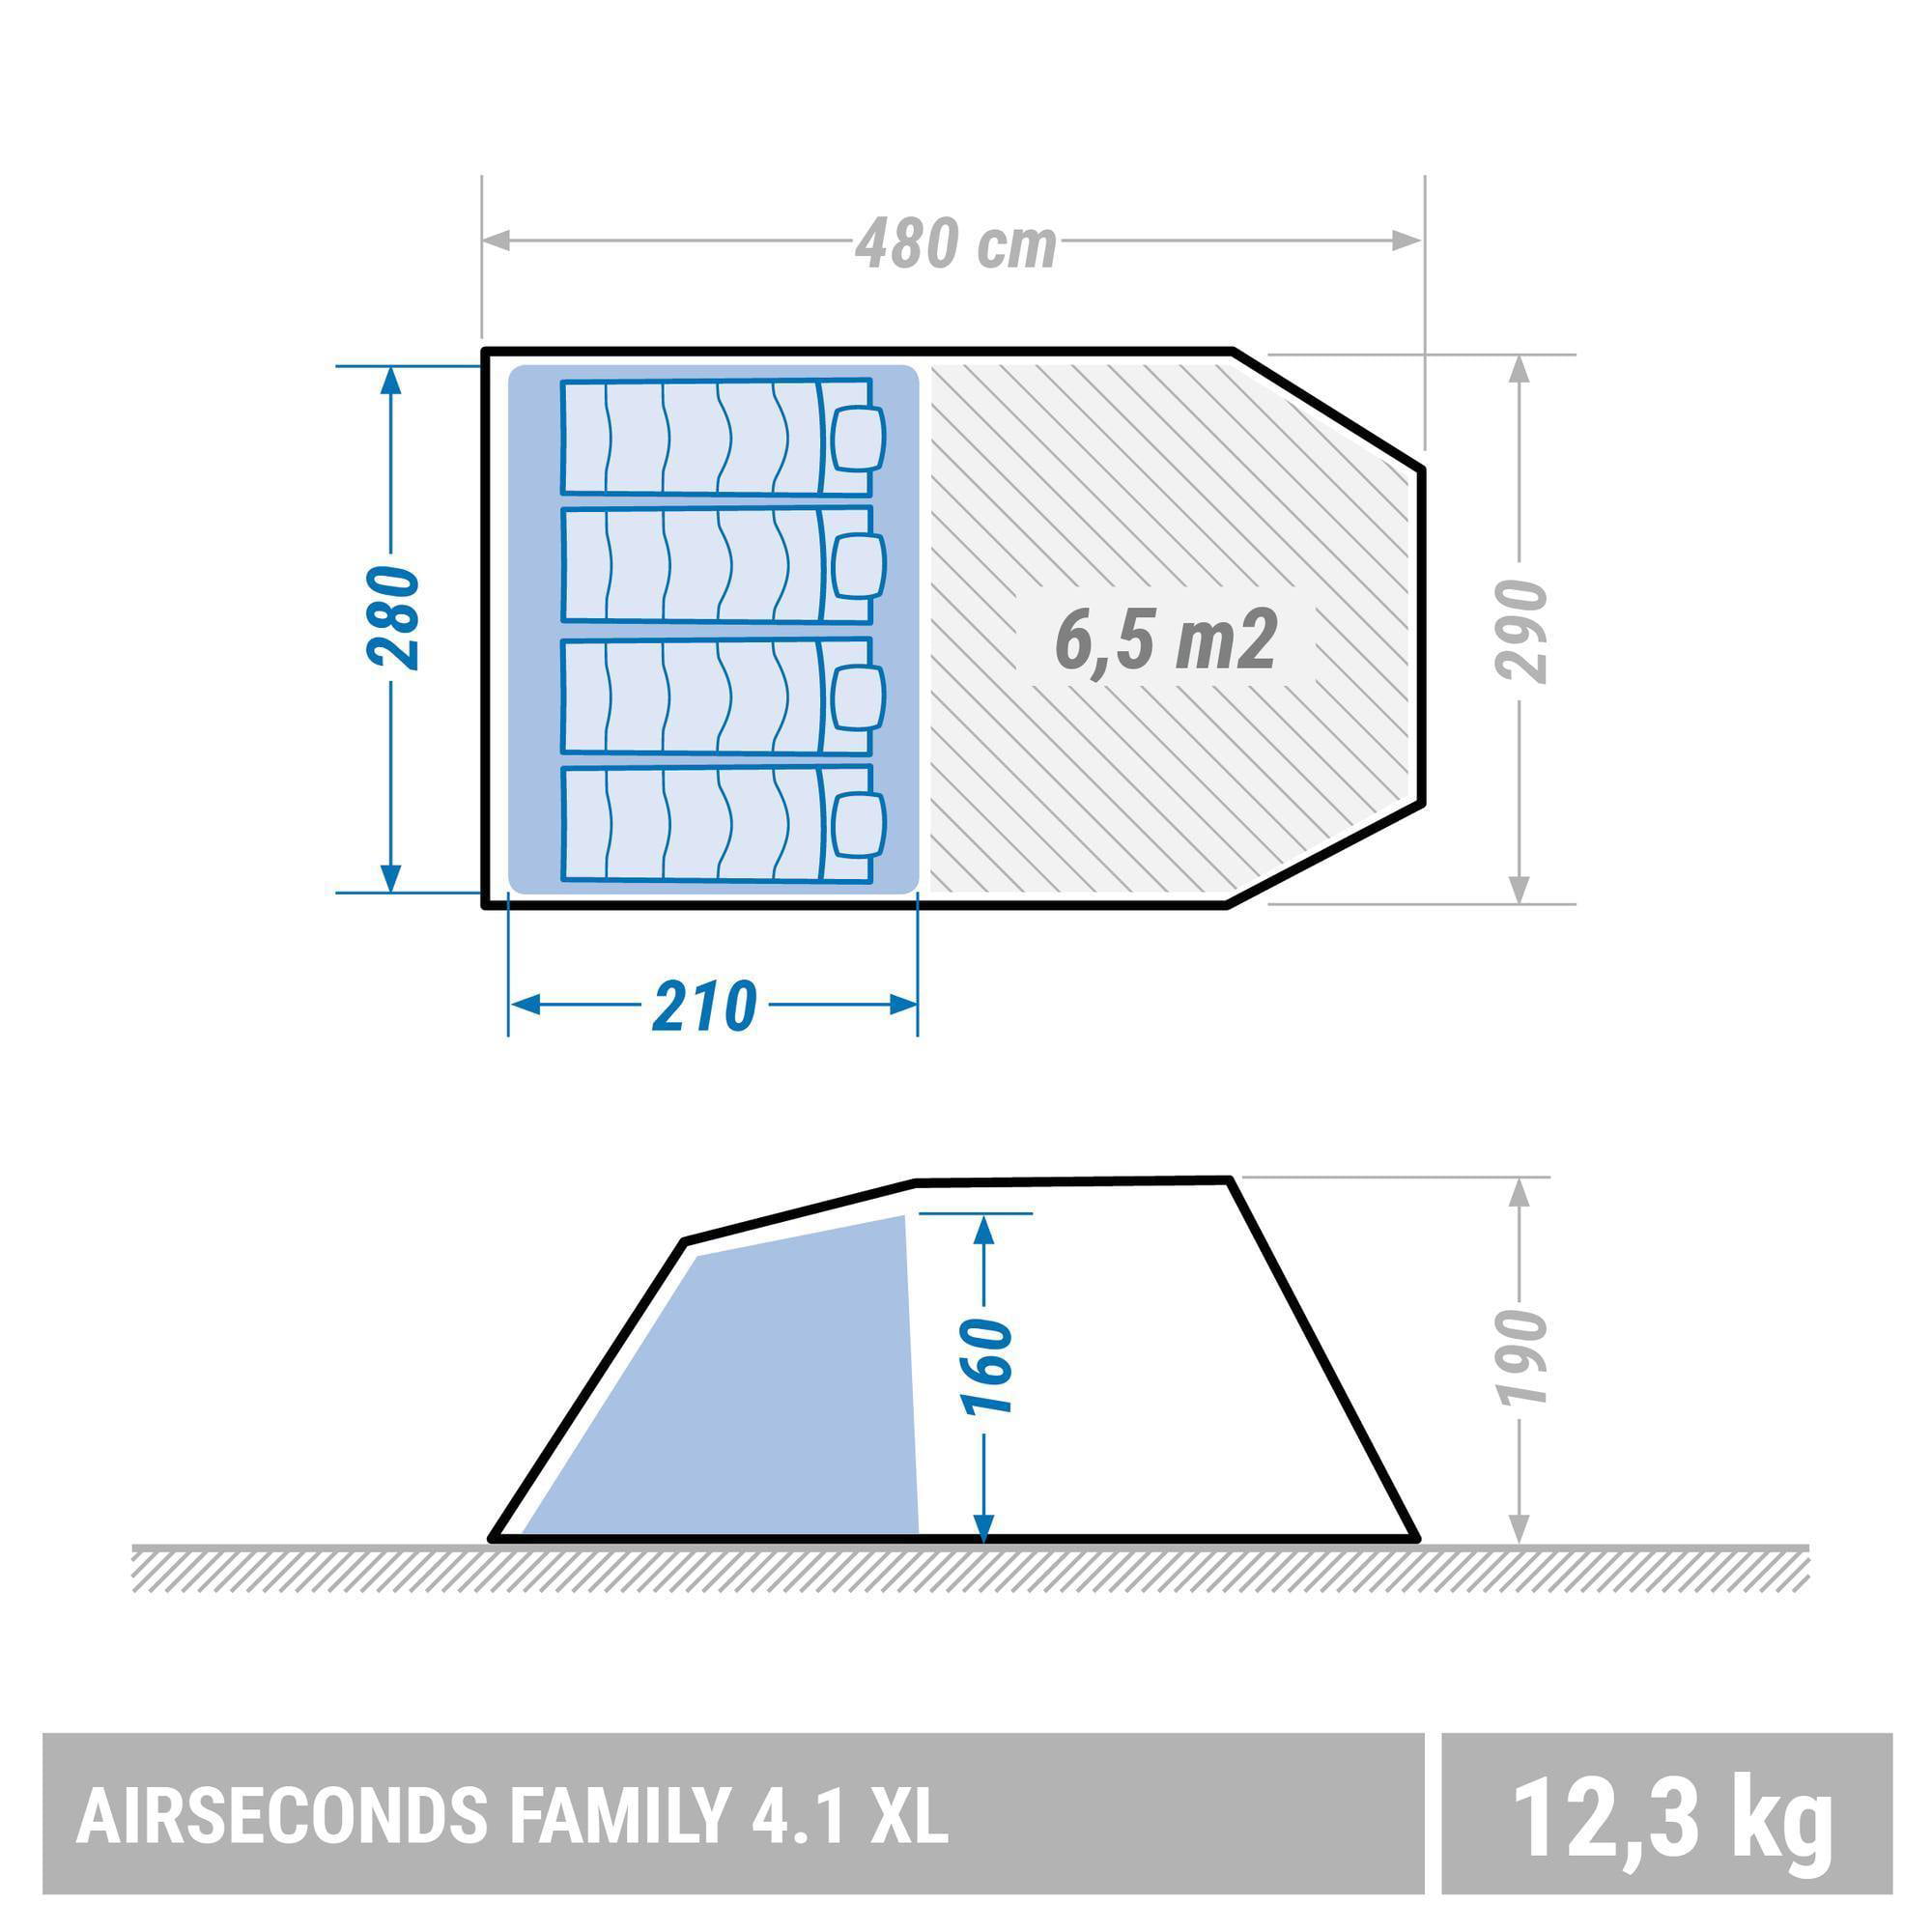 air seconds family 4.1 xl